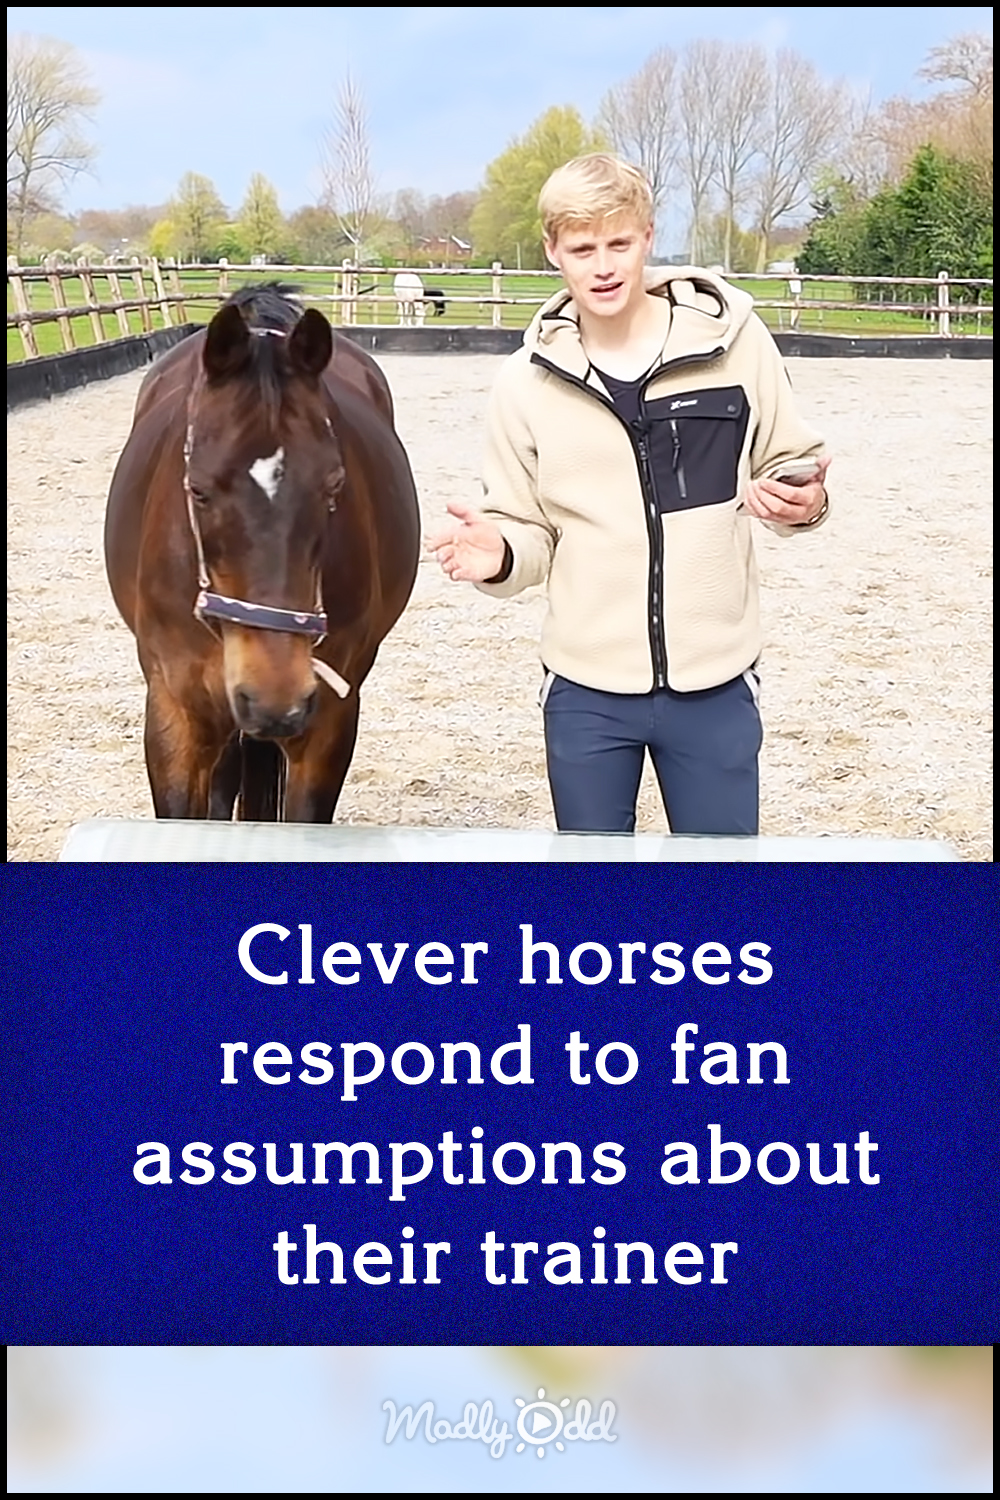 Clever horses respond to fan assumptions about their trainer